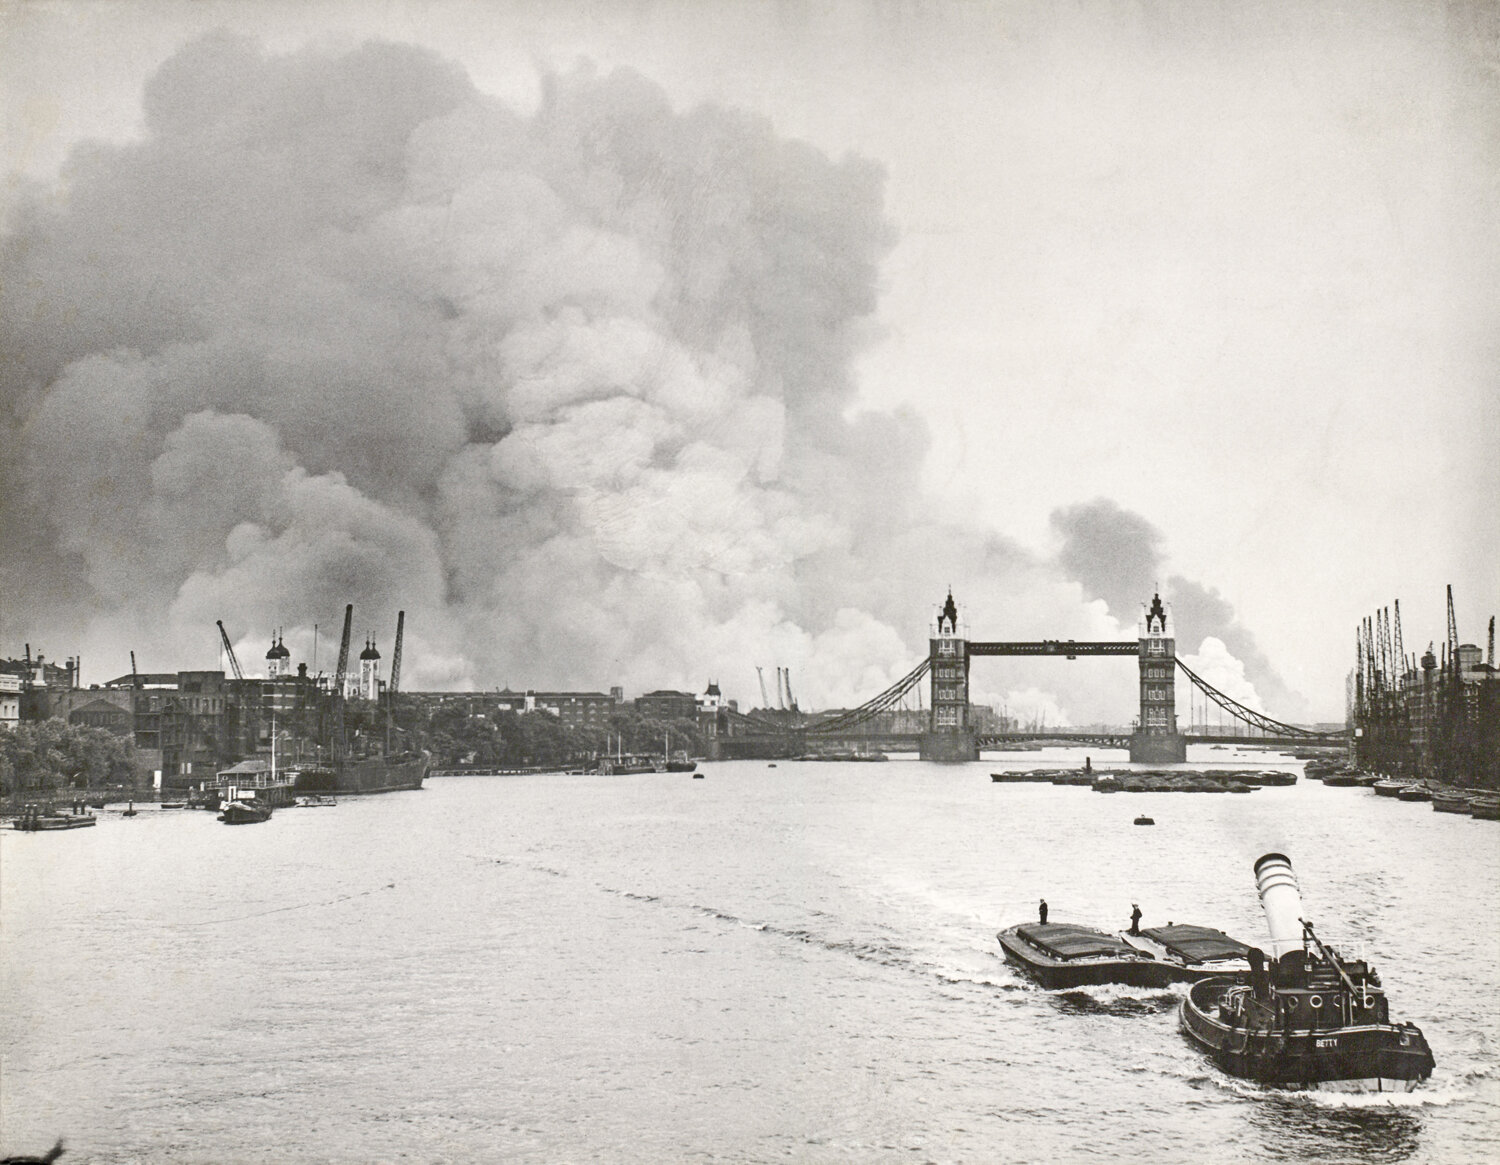 The Docklands ablaze during The Blitz on 7 September, 1940